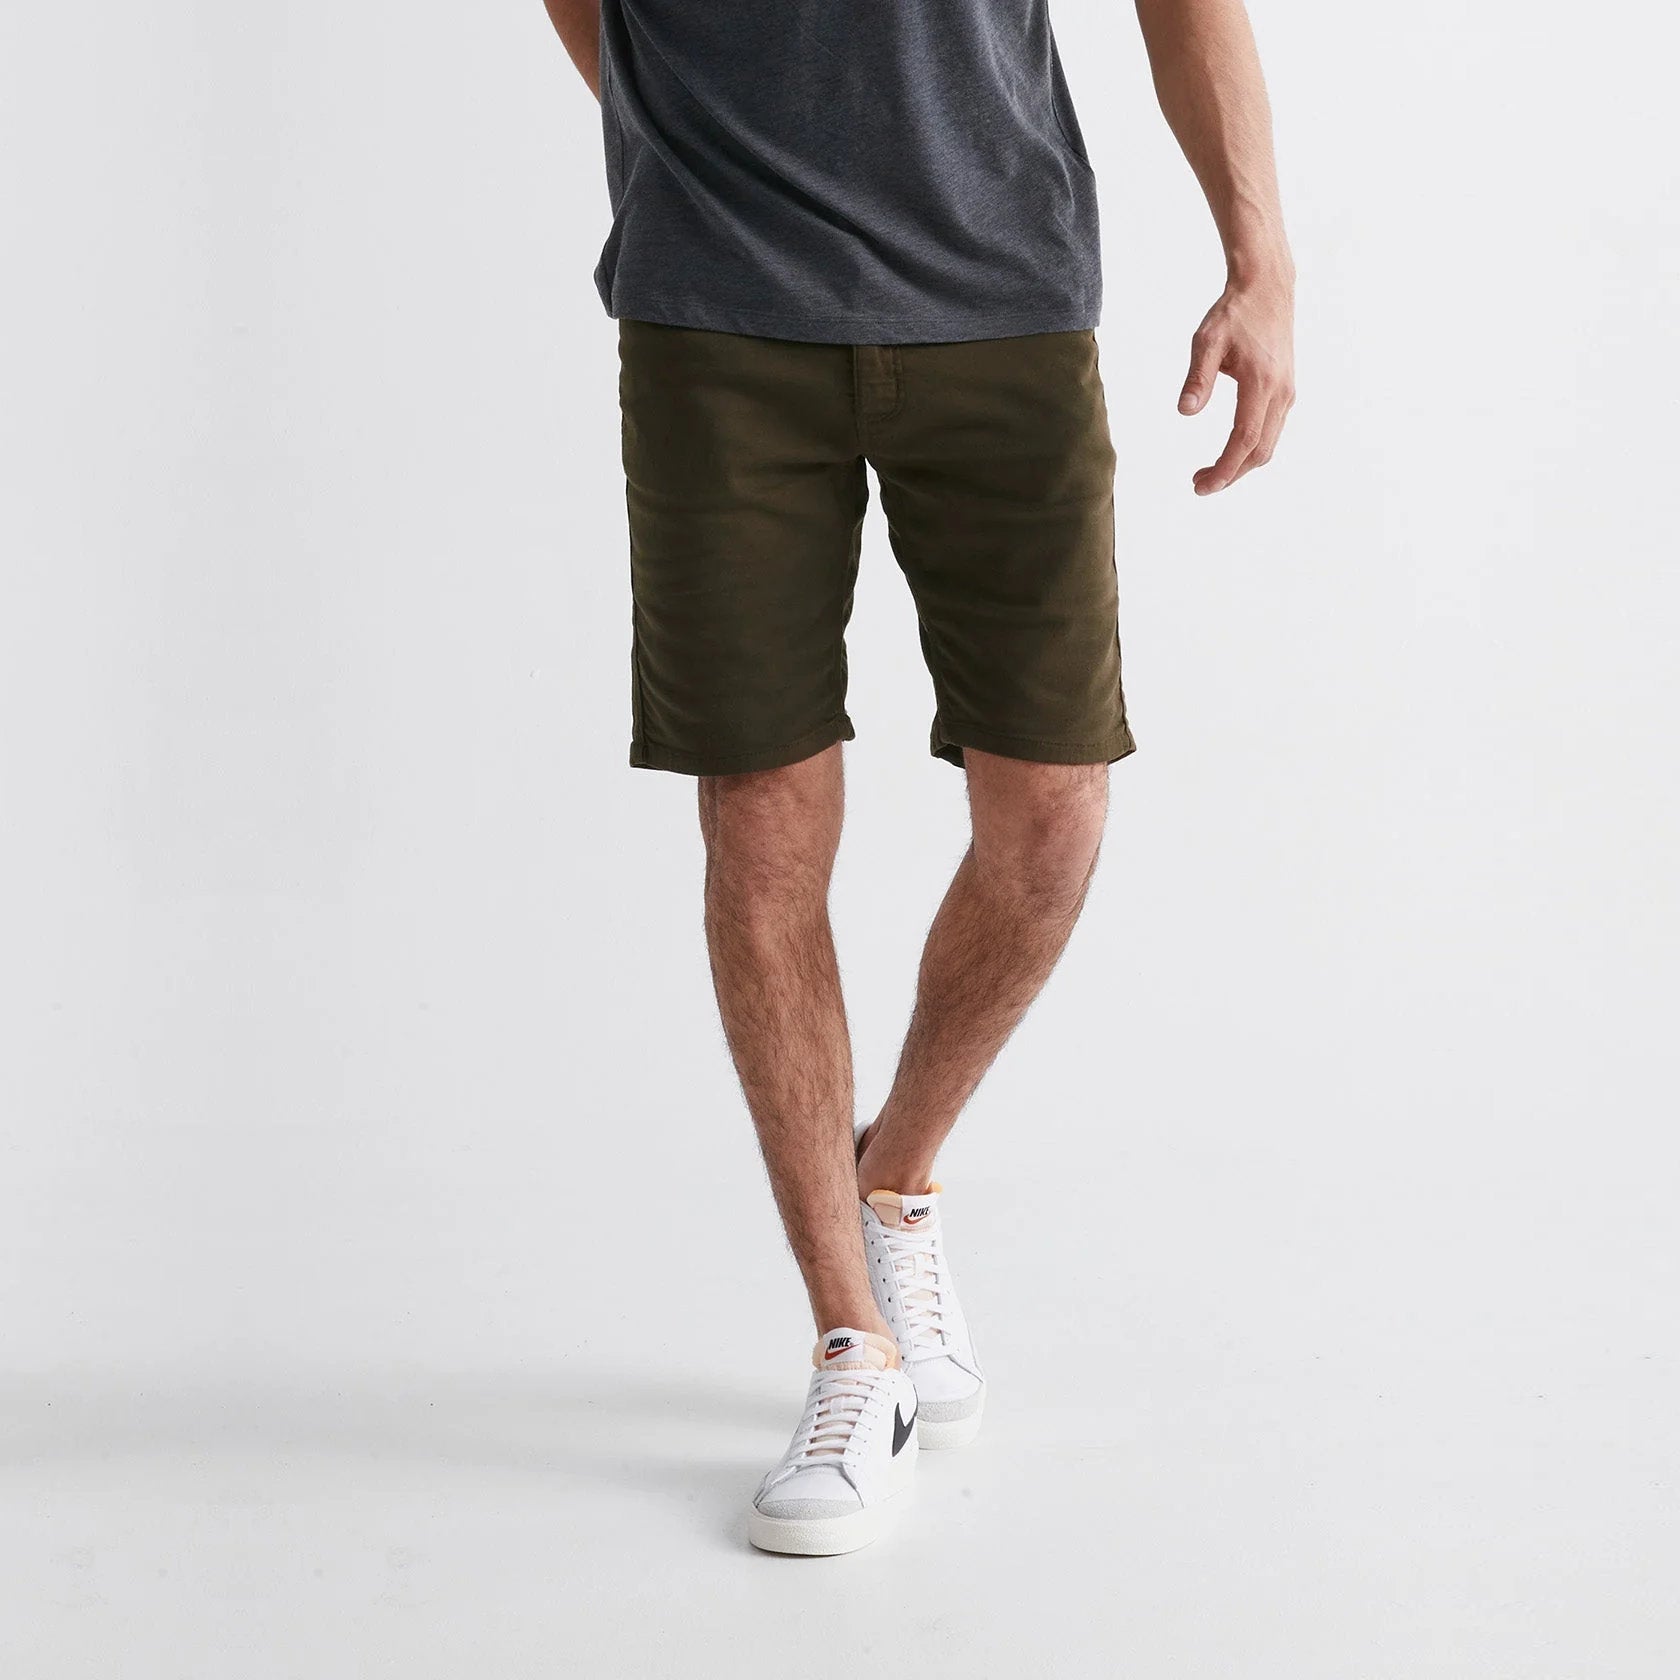 'Du/er No Sweat Shorts Slim' in 'Army Green' colour